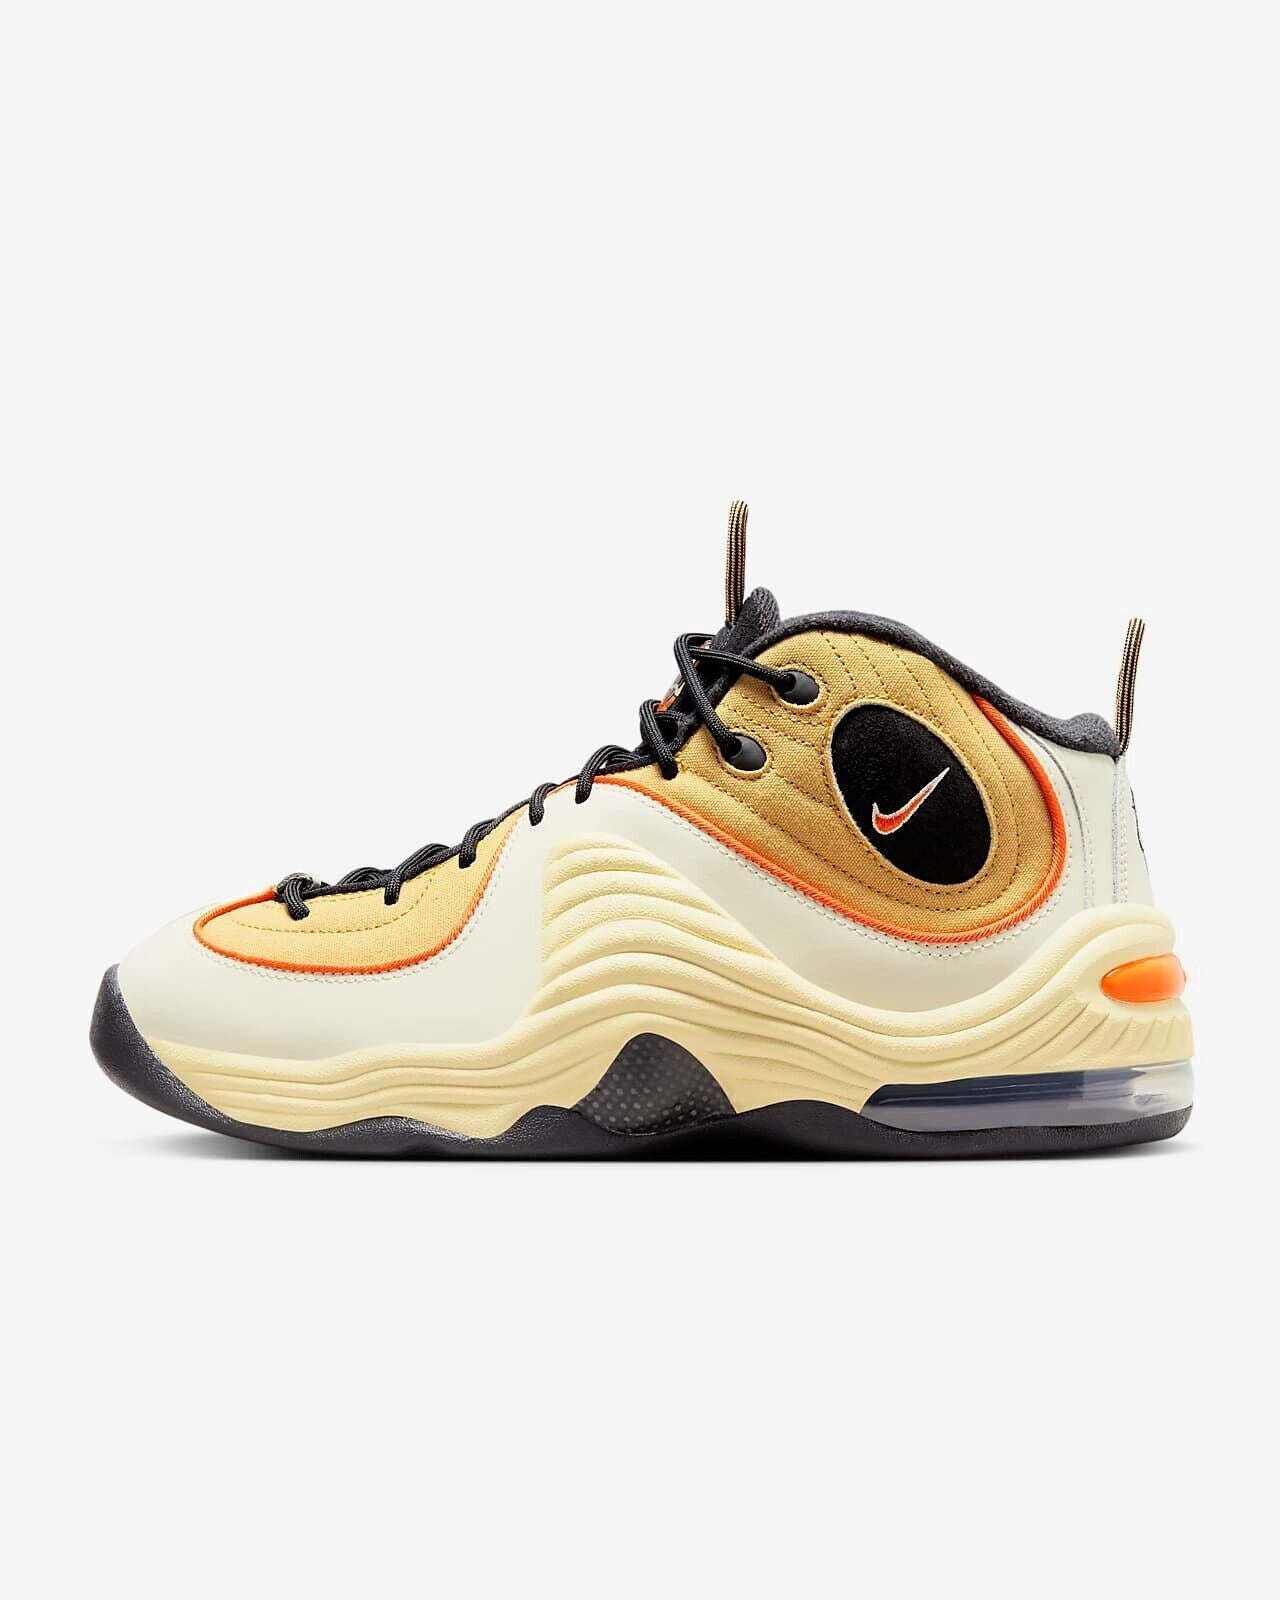 Nike Air Penny 2 "Wheat Gold" DV7229-700 Sneakers Shoes Mens Brand New [US 5-14]